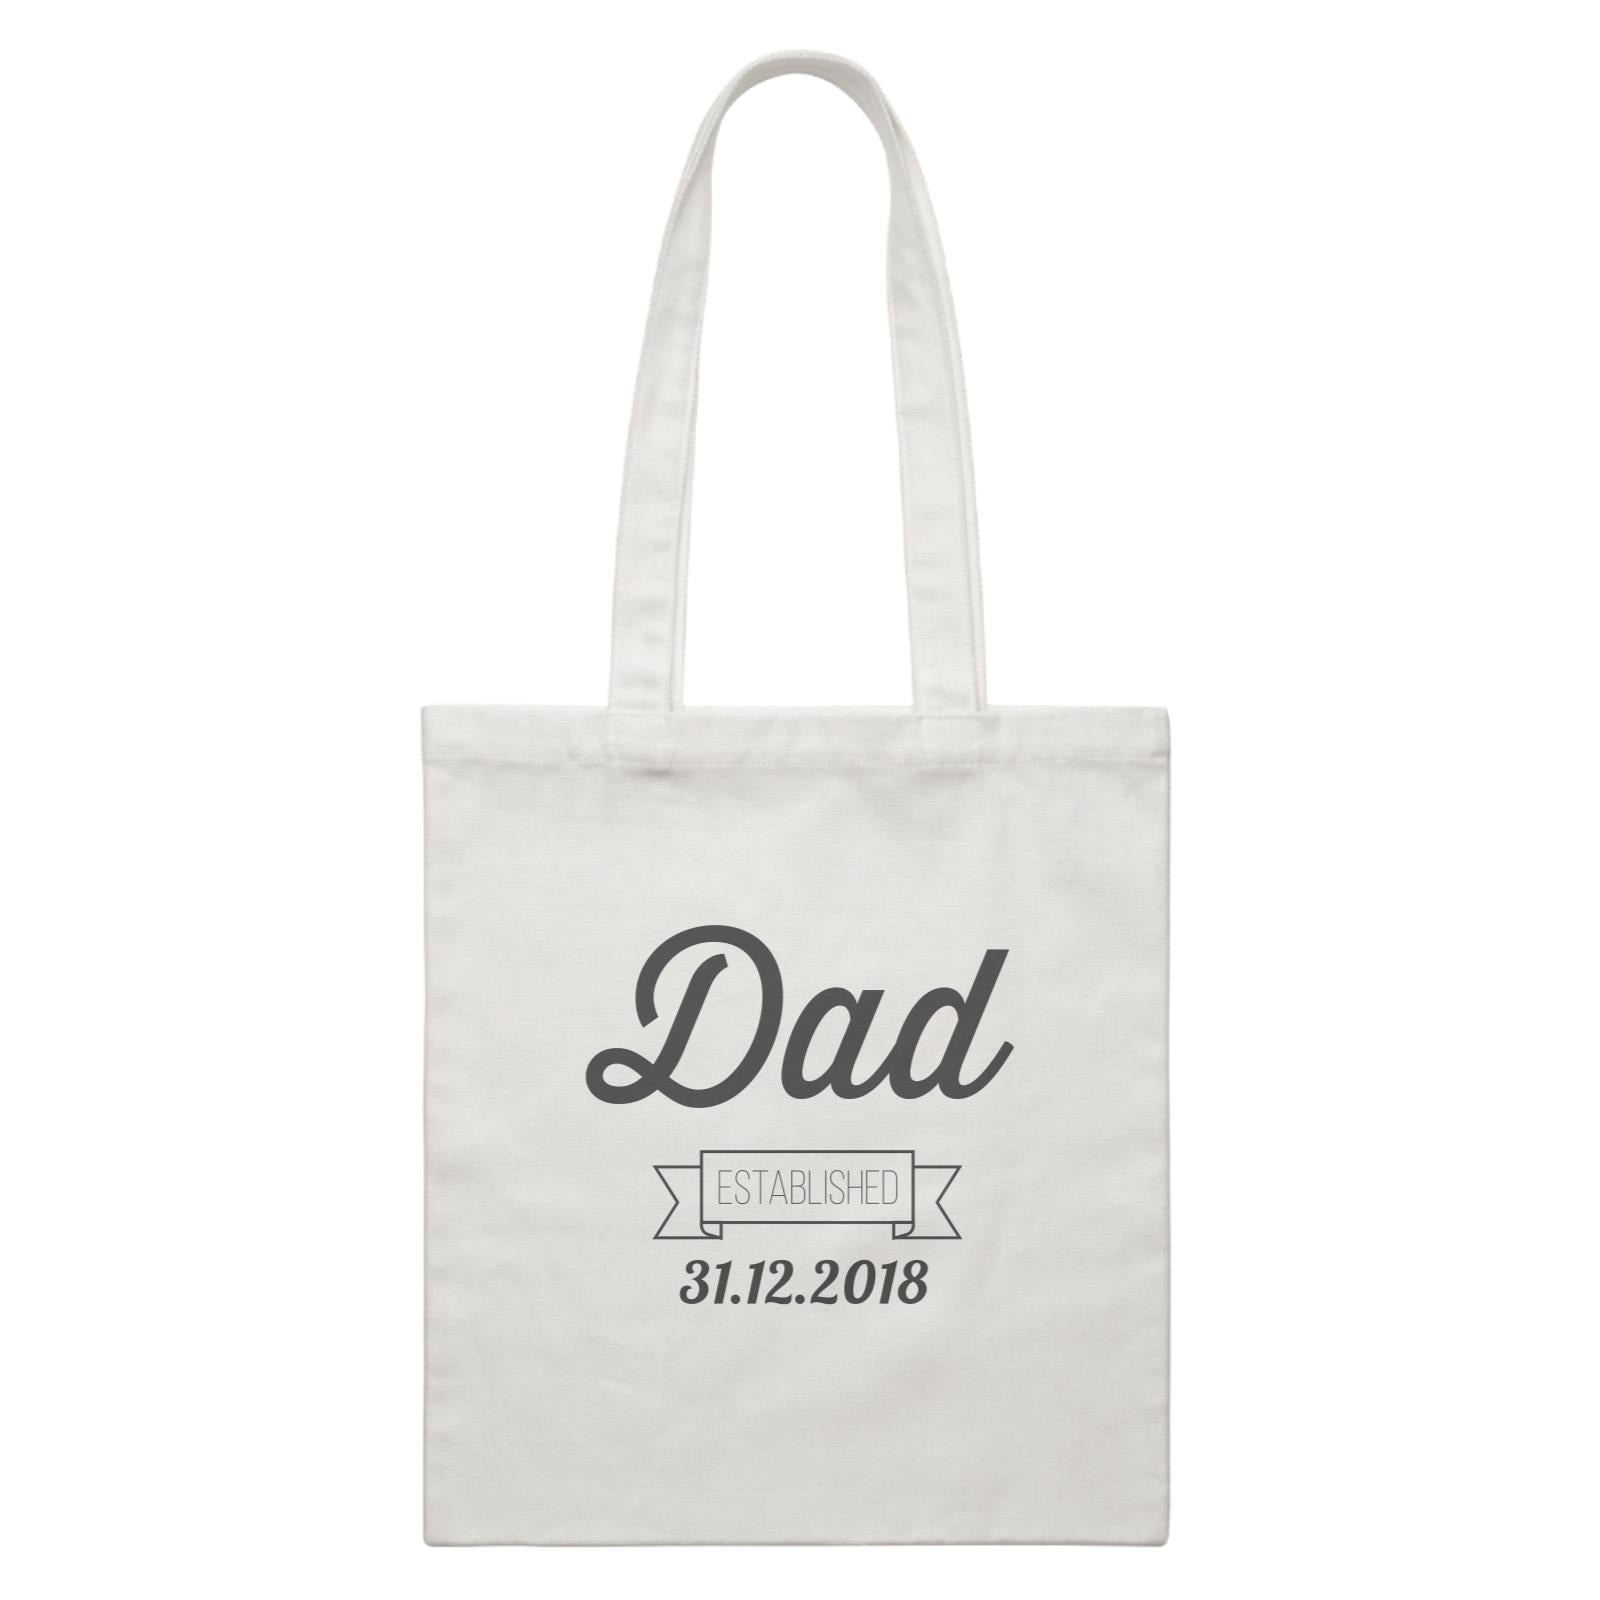 Dad Established Typography With Date White Canvas Bag